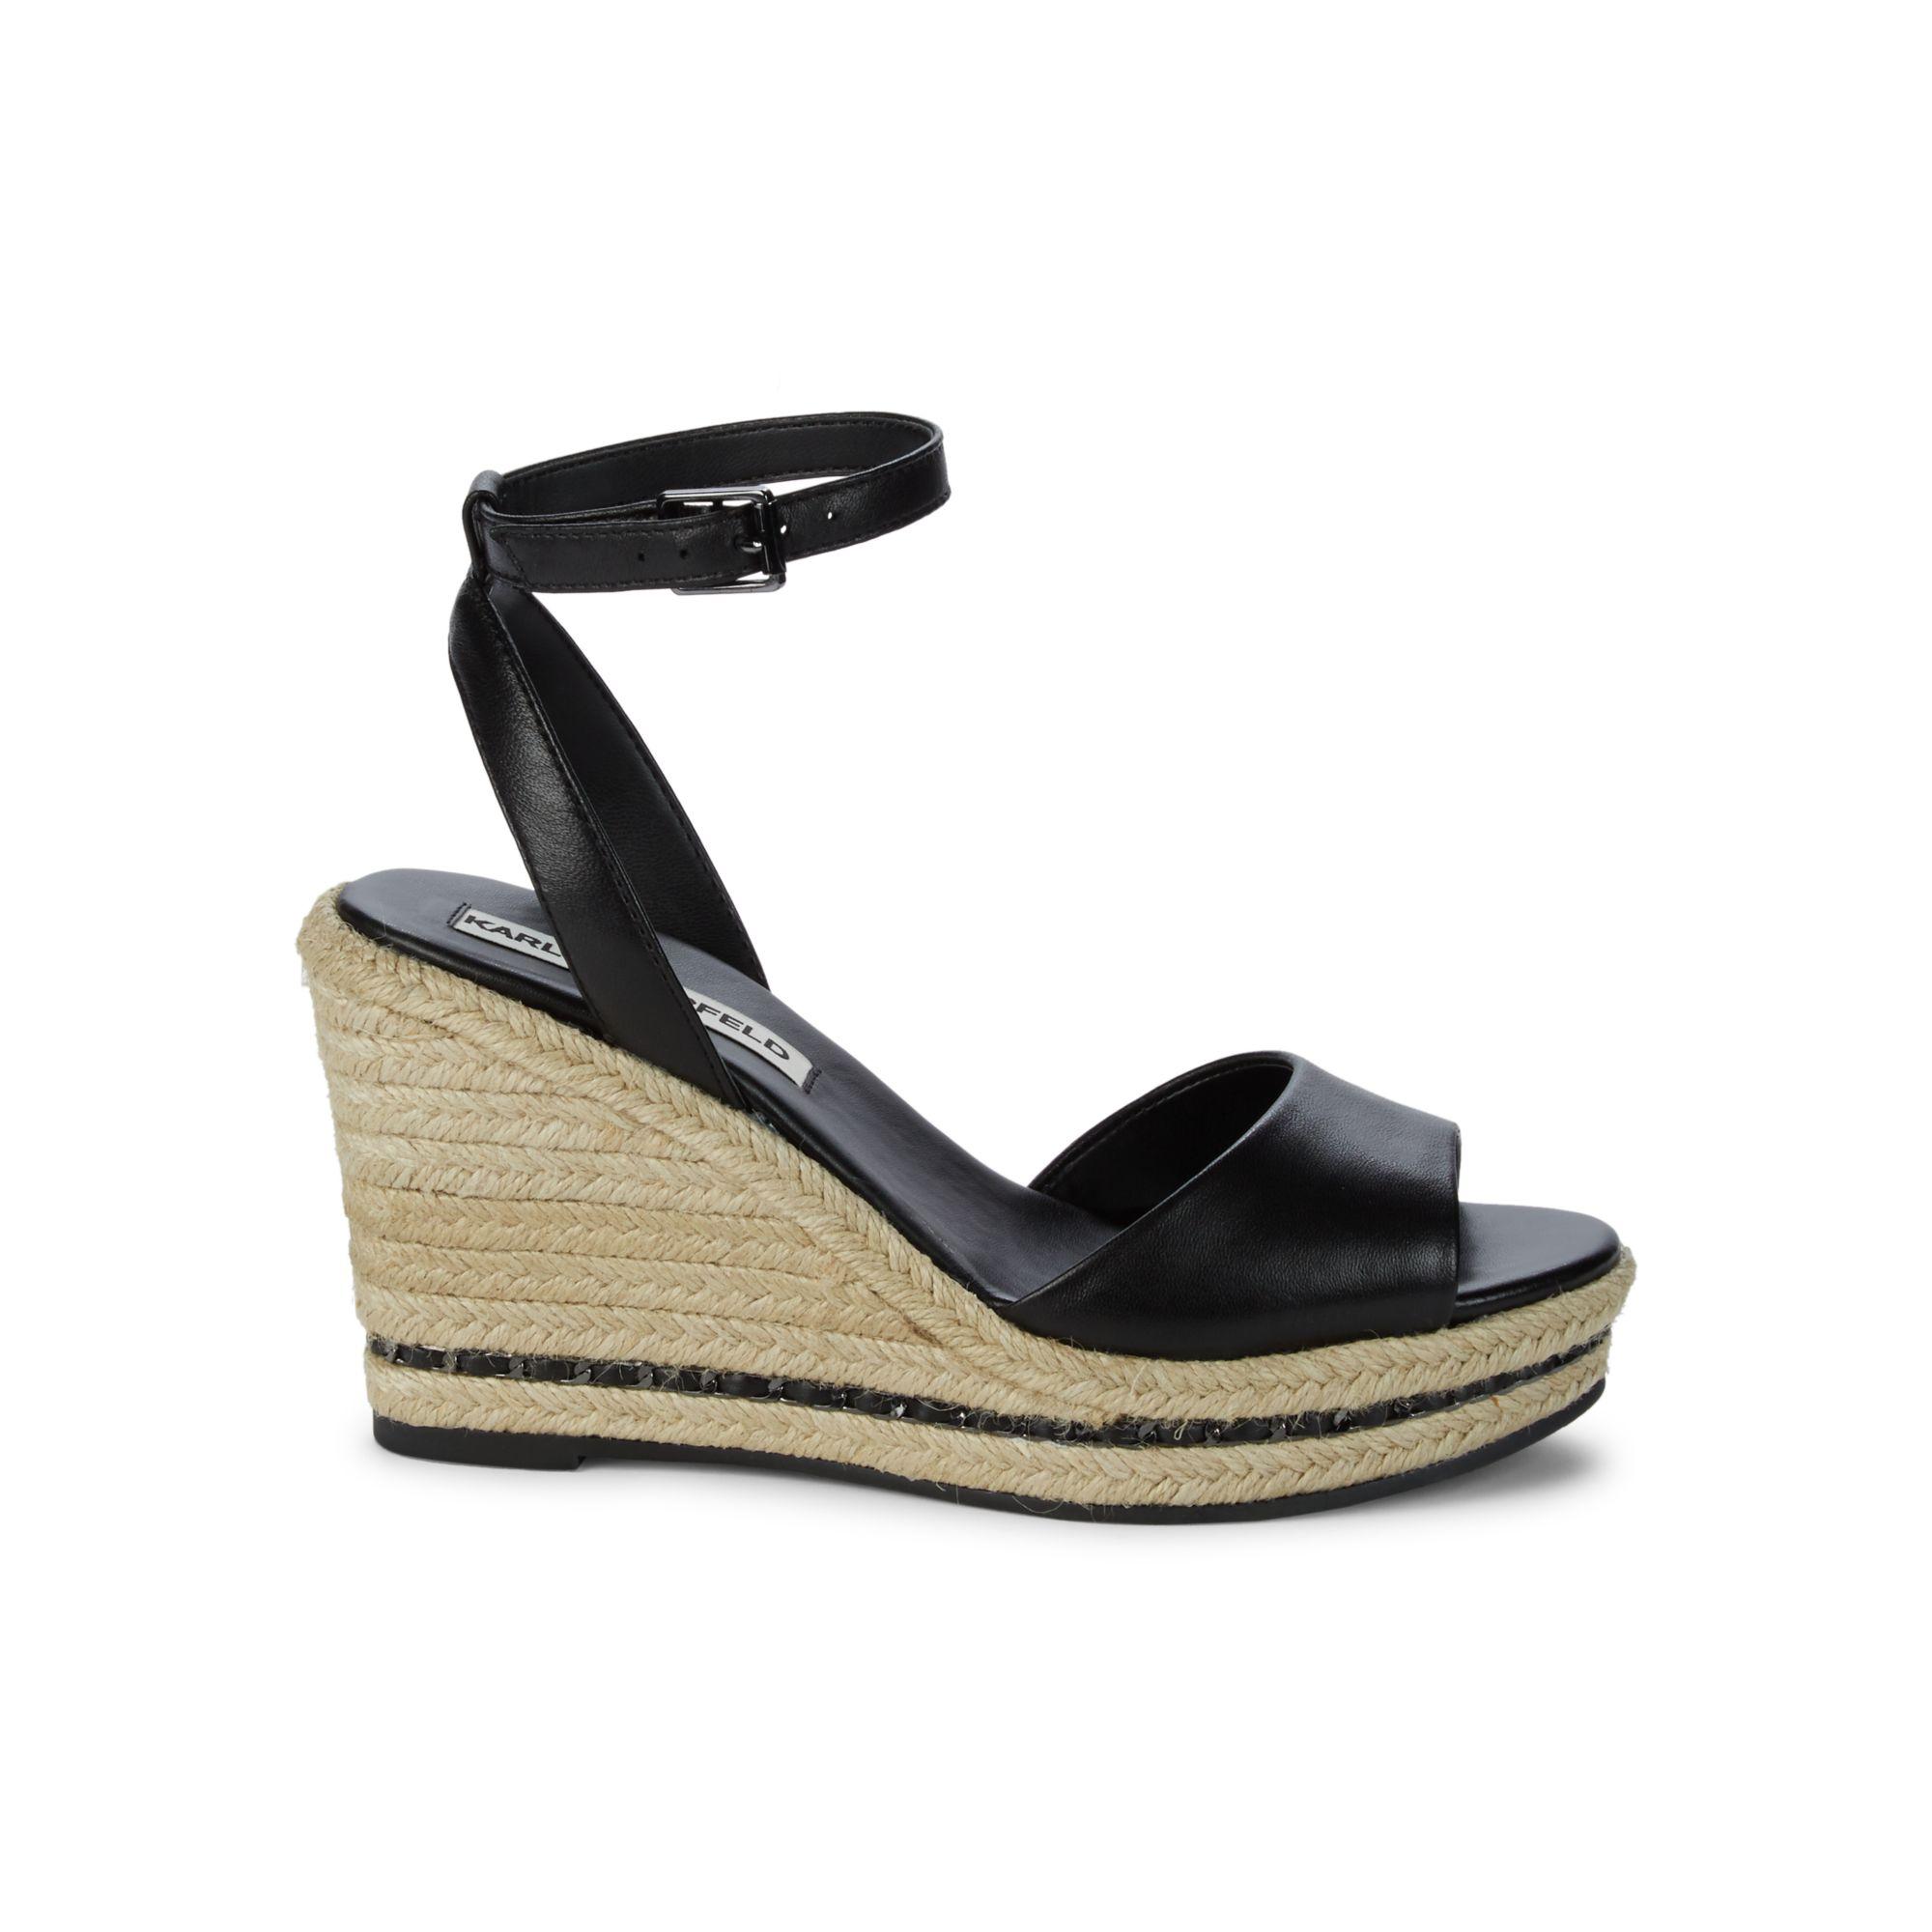 Karl Lagerfeld Carin Leather Espadrille Wedge Sandals in Black - Lyst